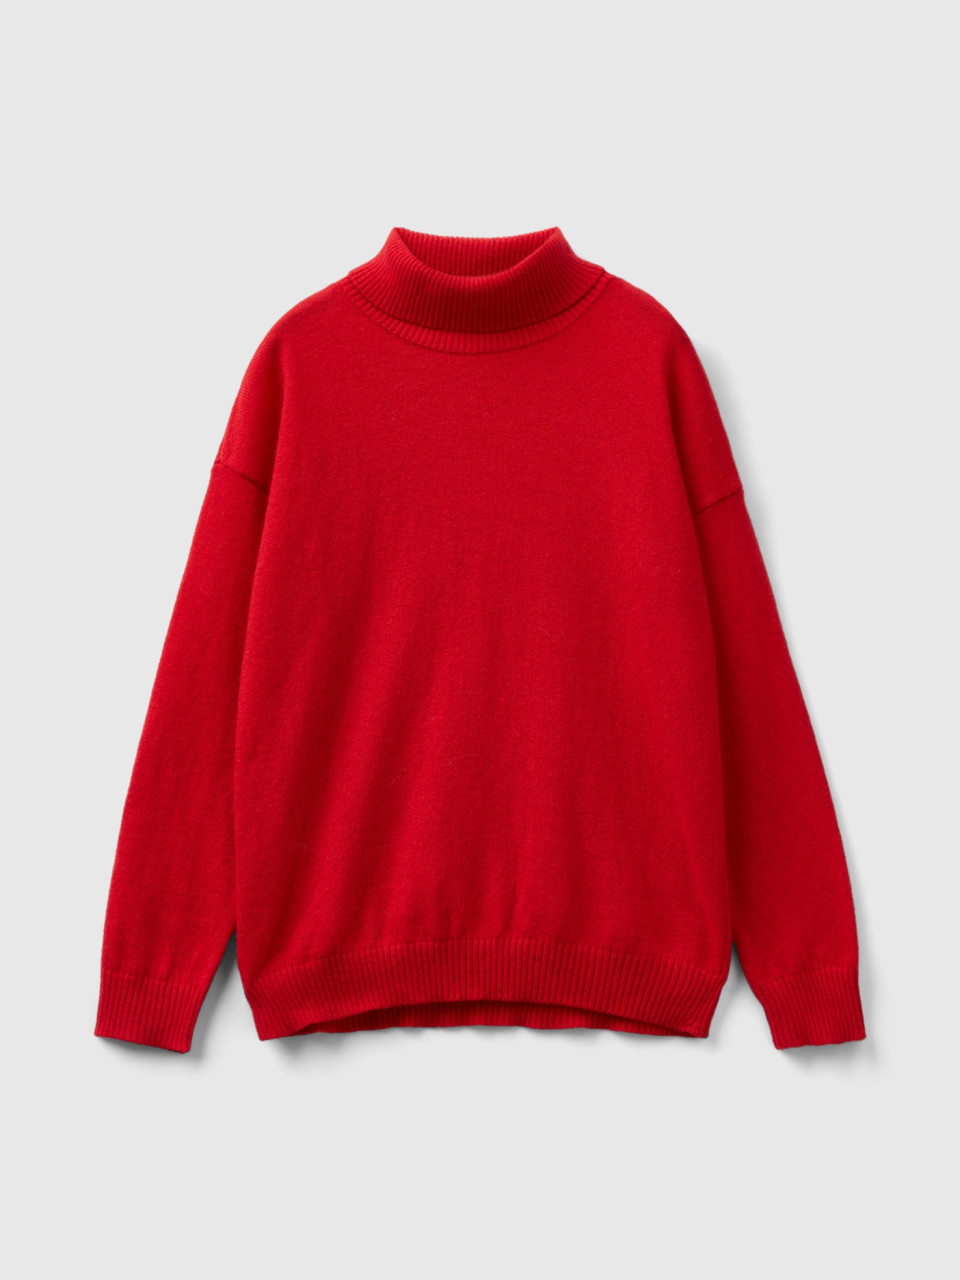 Benetton, Turtleneck Sweater In Cashmere And Wool Blend, Red, Kids